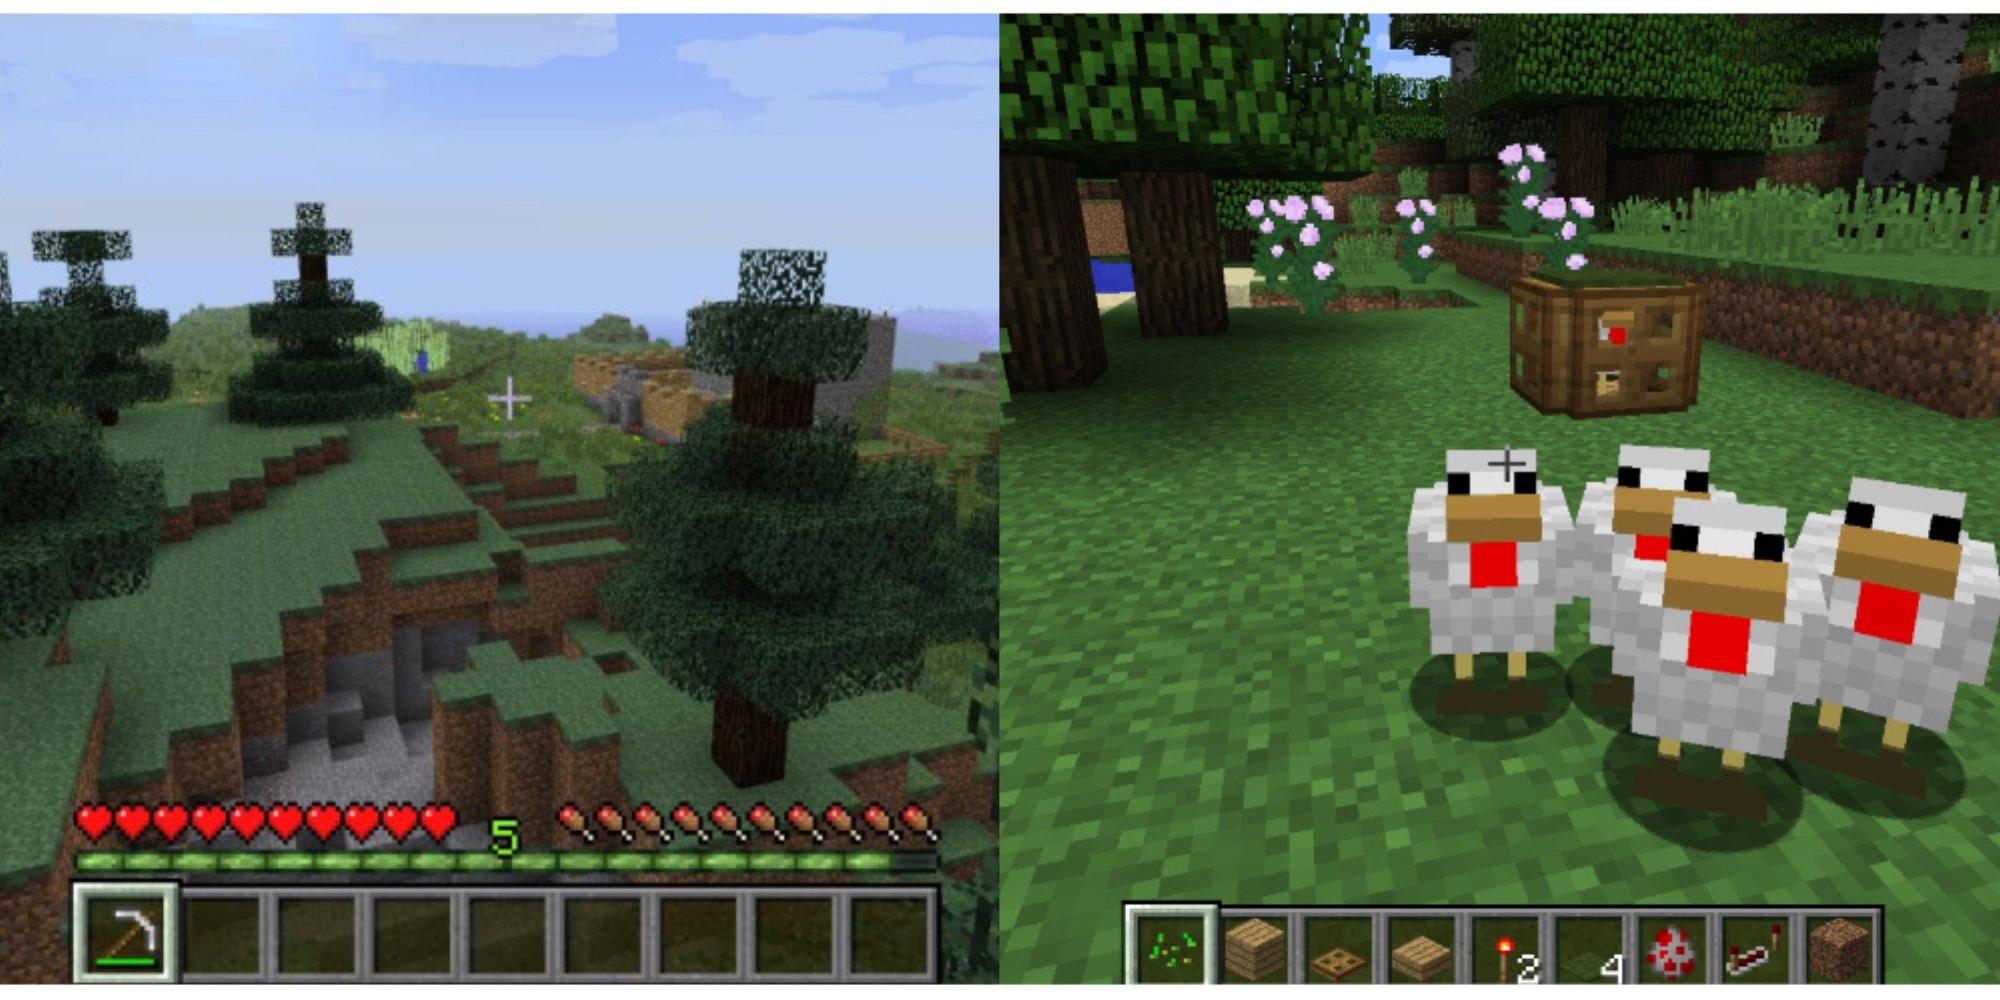 split image of a biome and a group of chickens in Minecraft